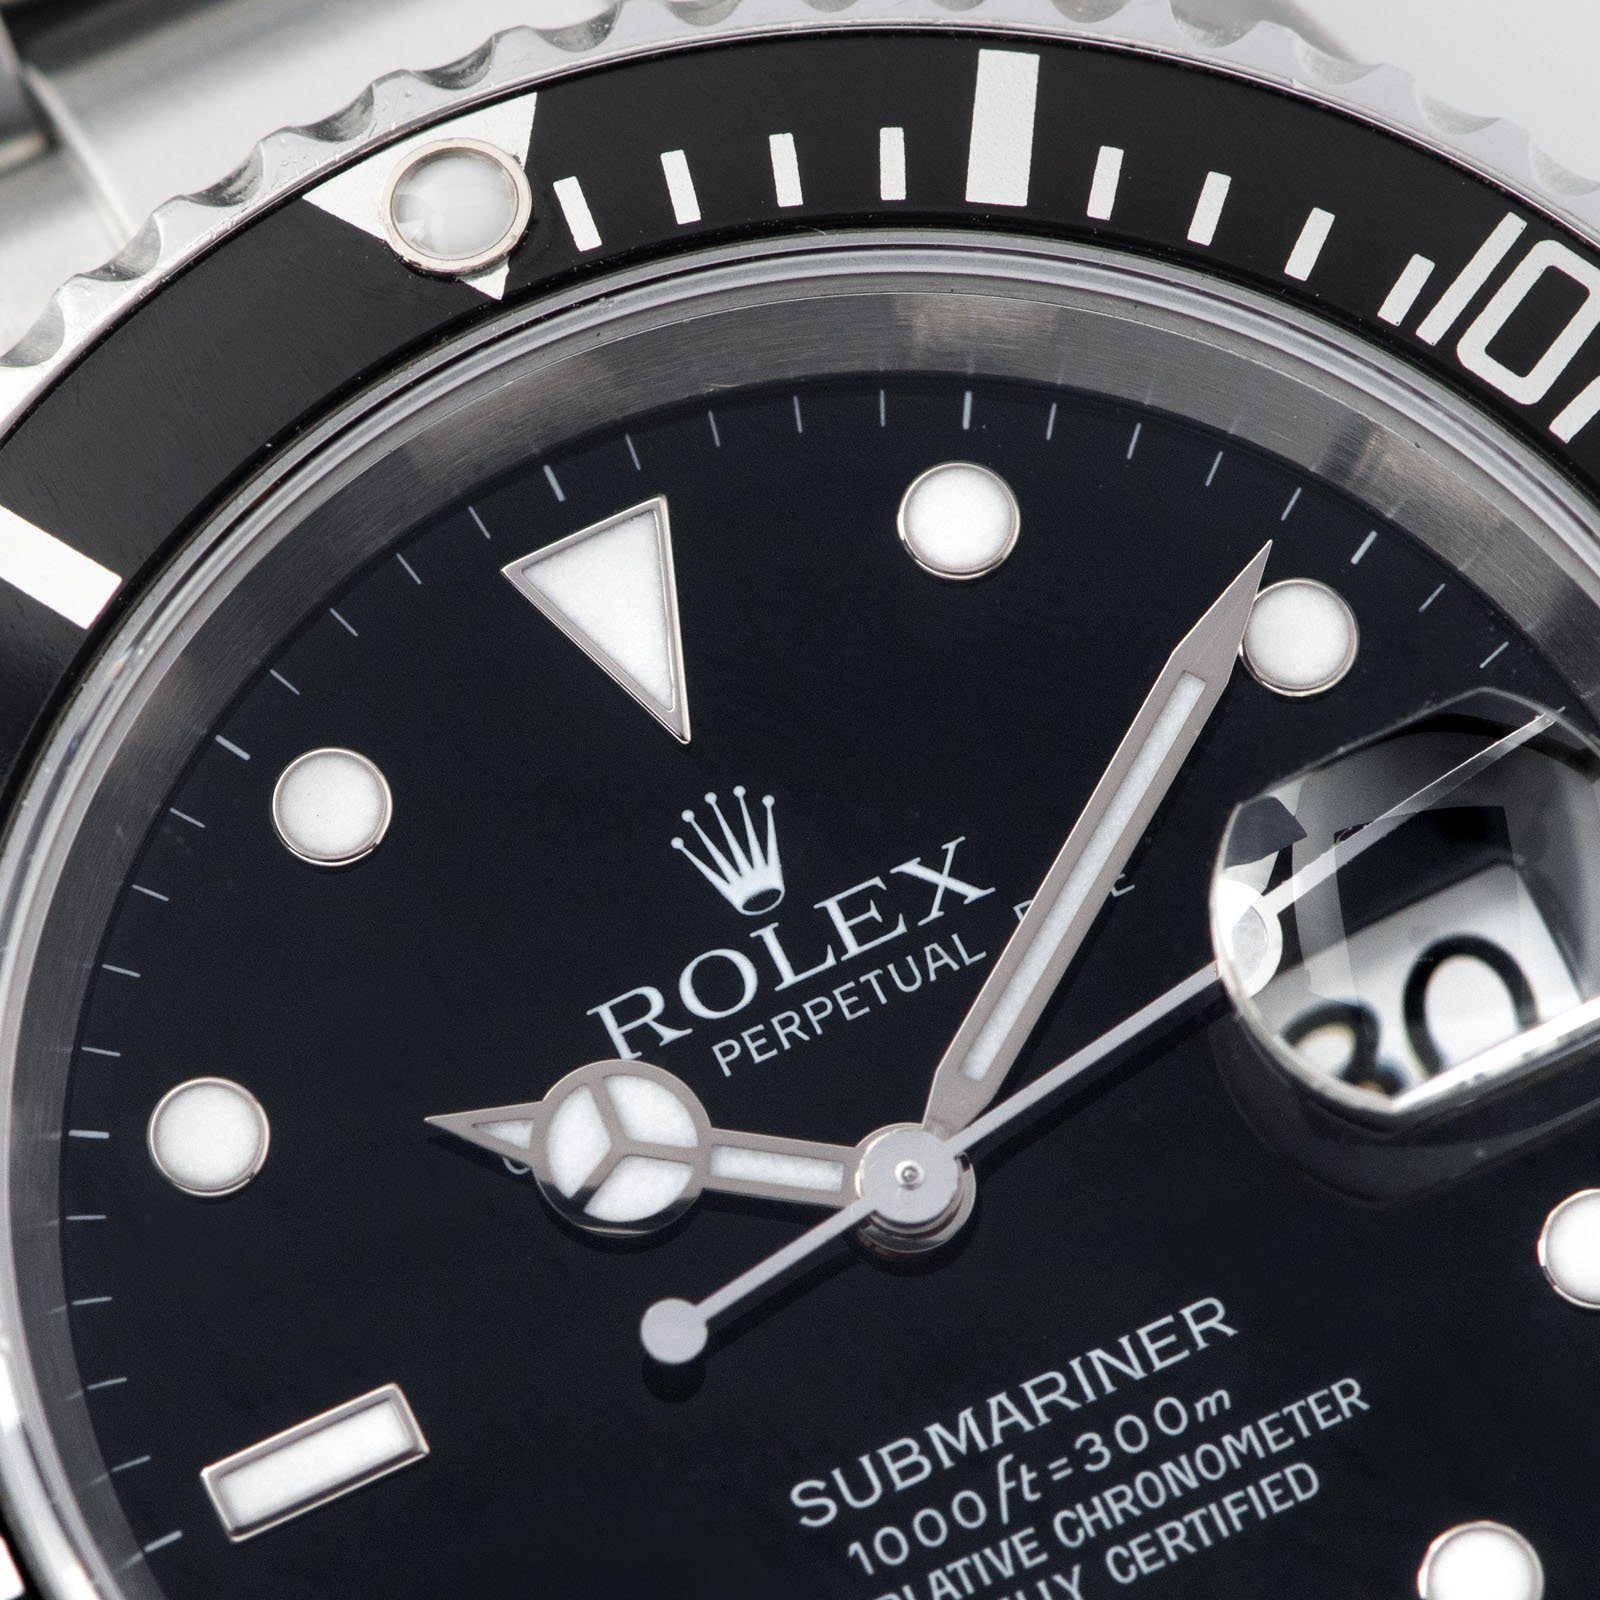 Rolex Submariner Date Reference 16610